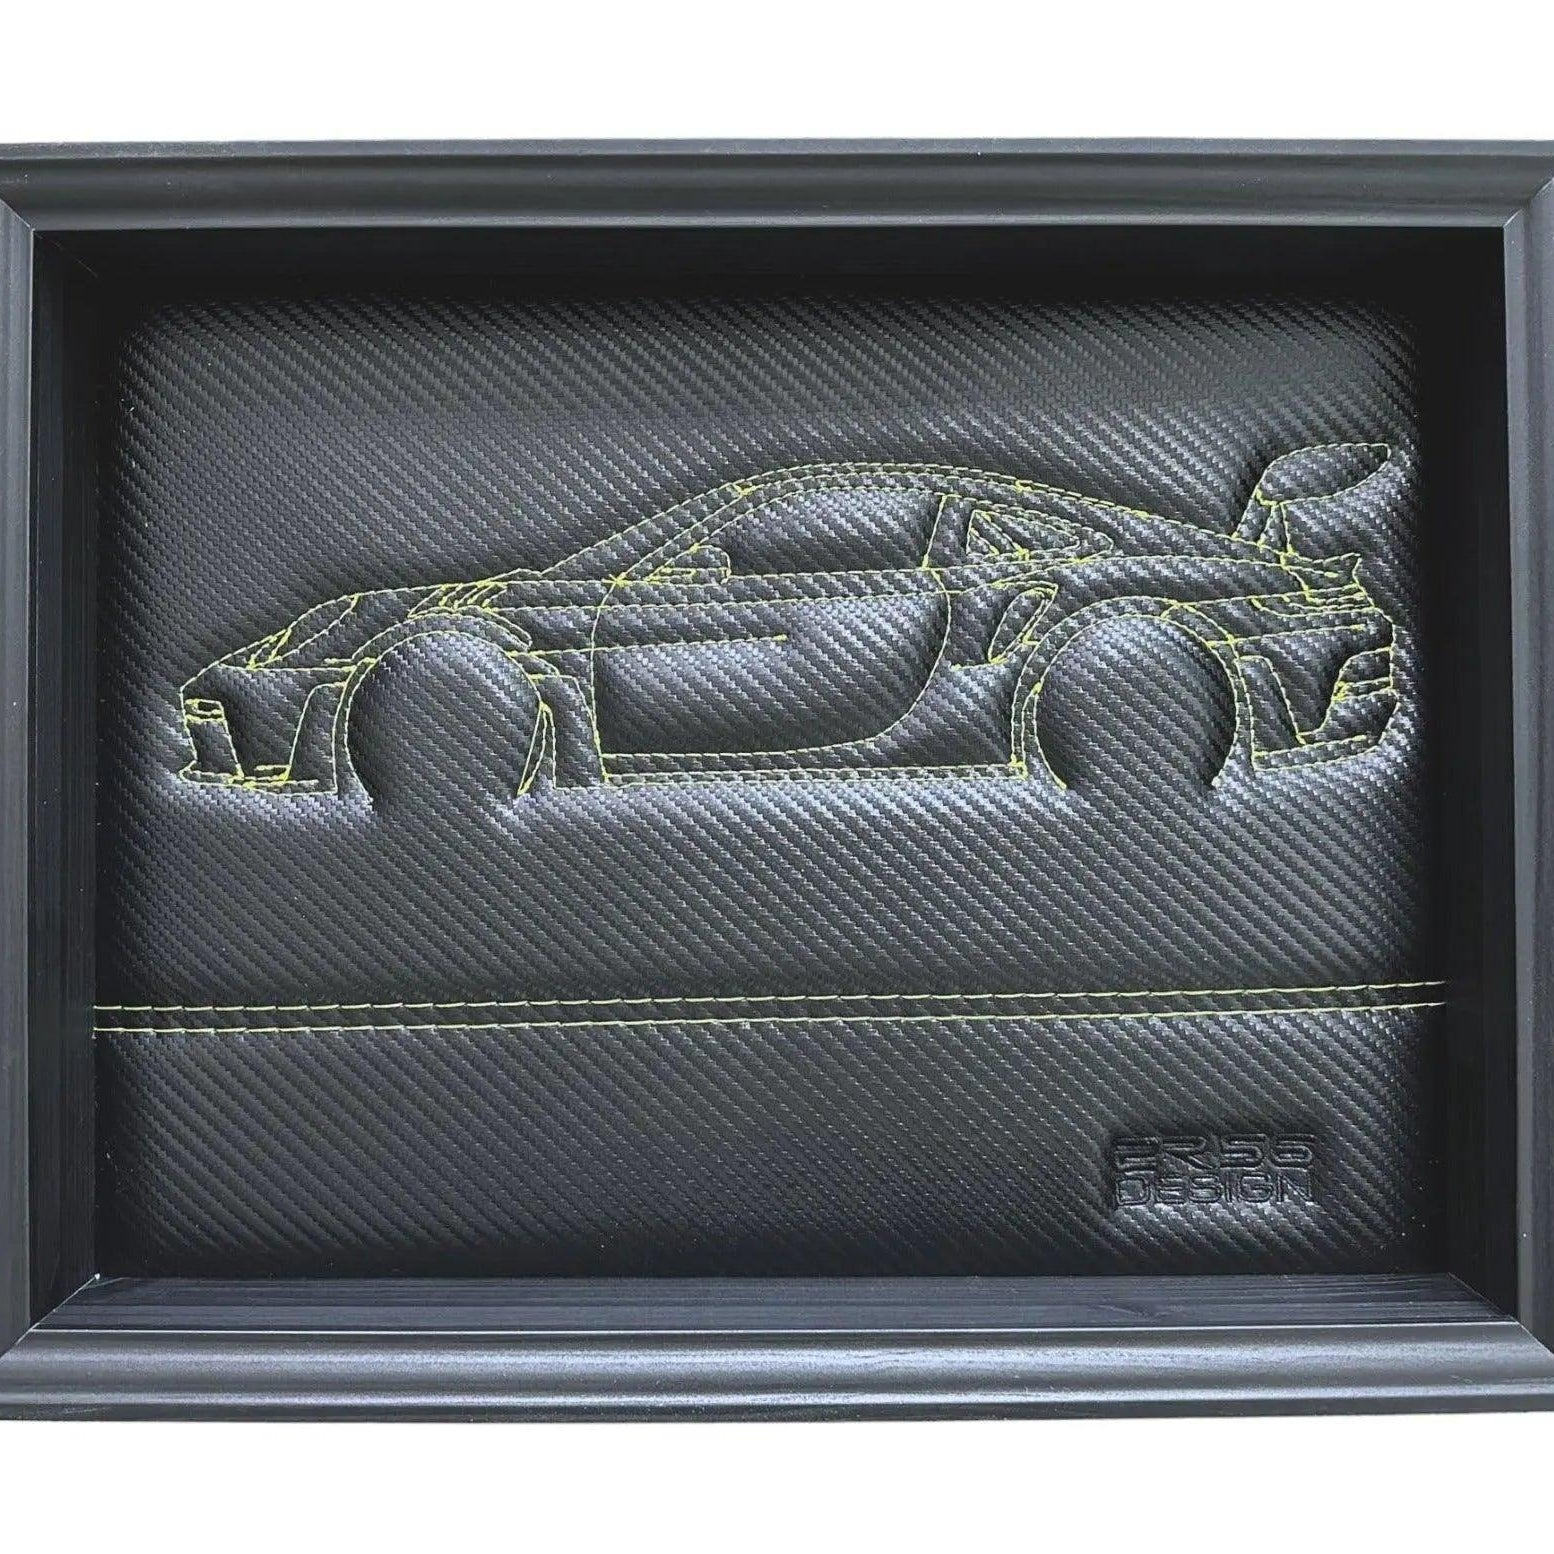 Carbon Fiber Leather Porsche 911 - 992 Inspired Wall Art: Embroidered Yellow Stitch Luxury Decor